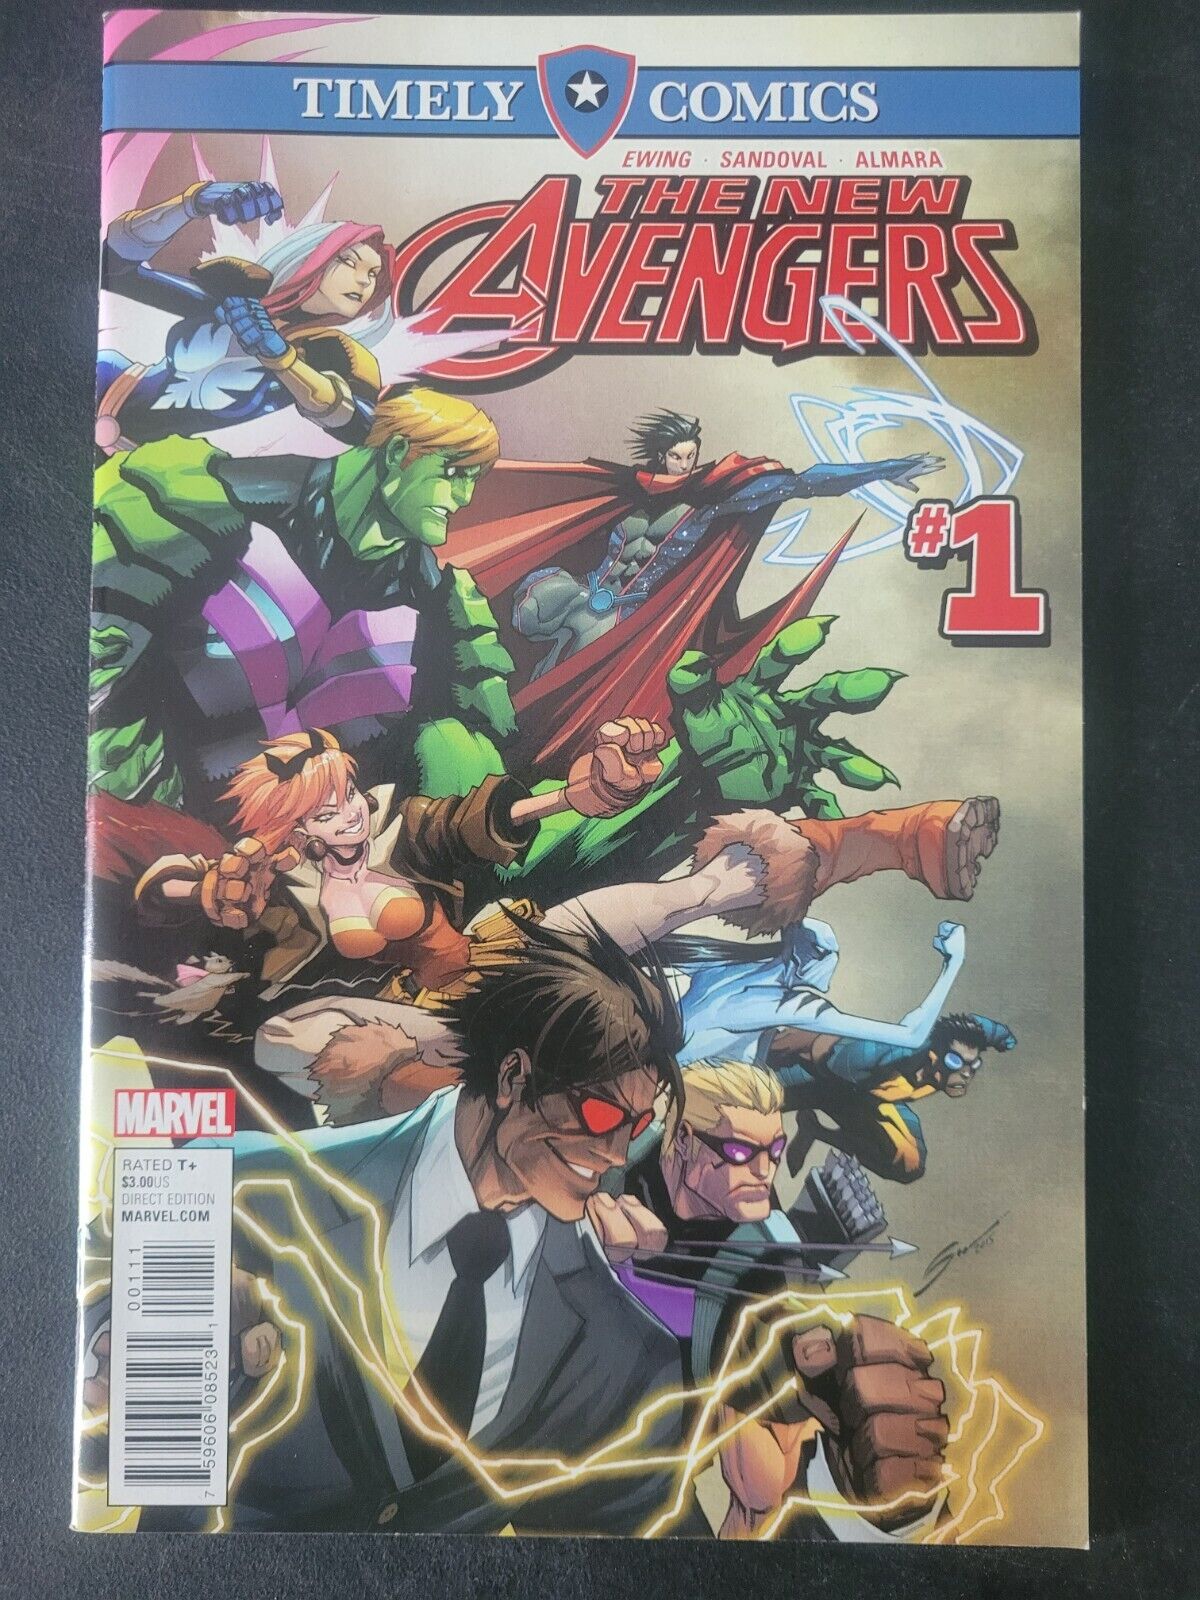 TIMELY COMICS: THE NEW AVENGERS #1 (2016) MARVEL COMICS DOUBLE-SIZED SPECIAL